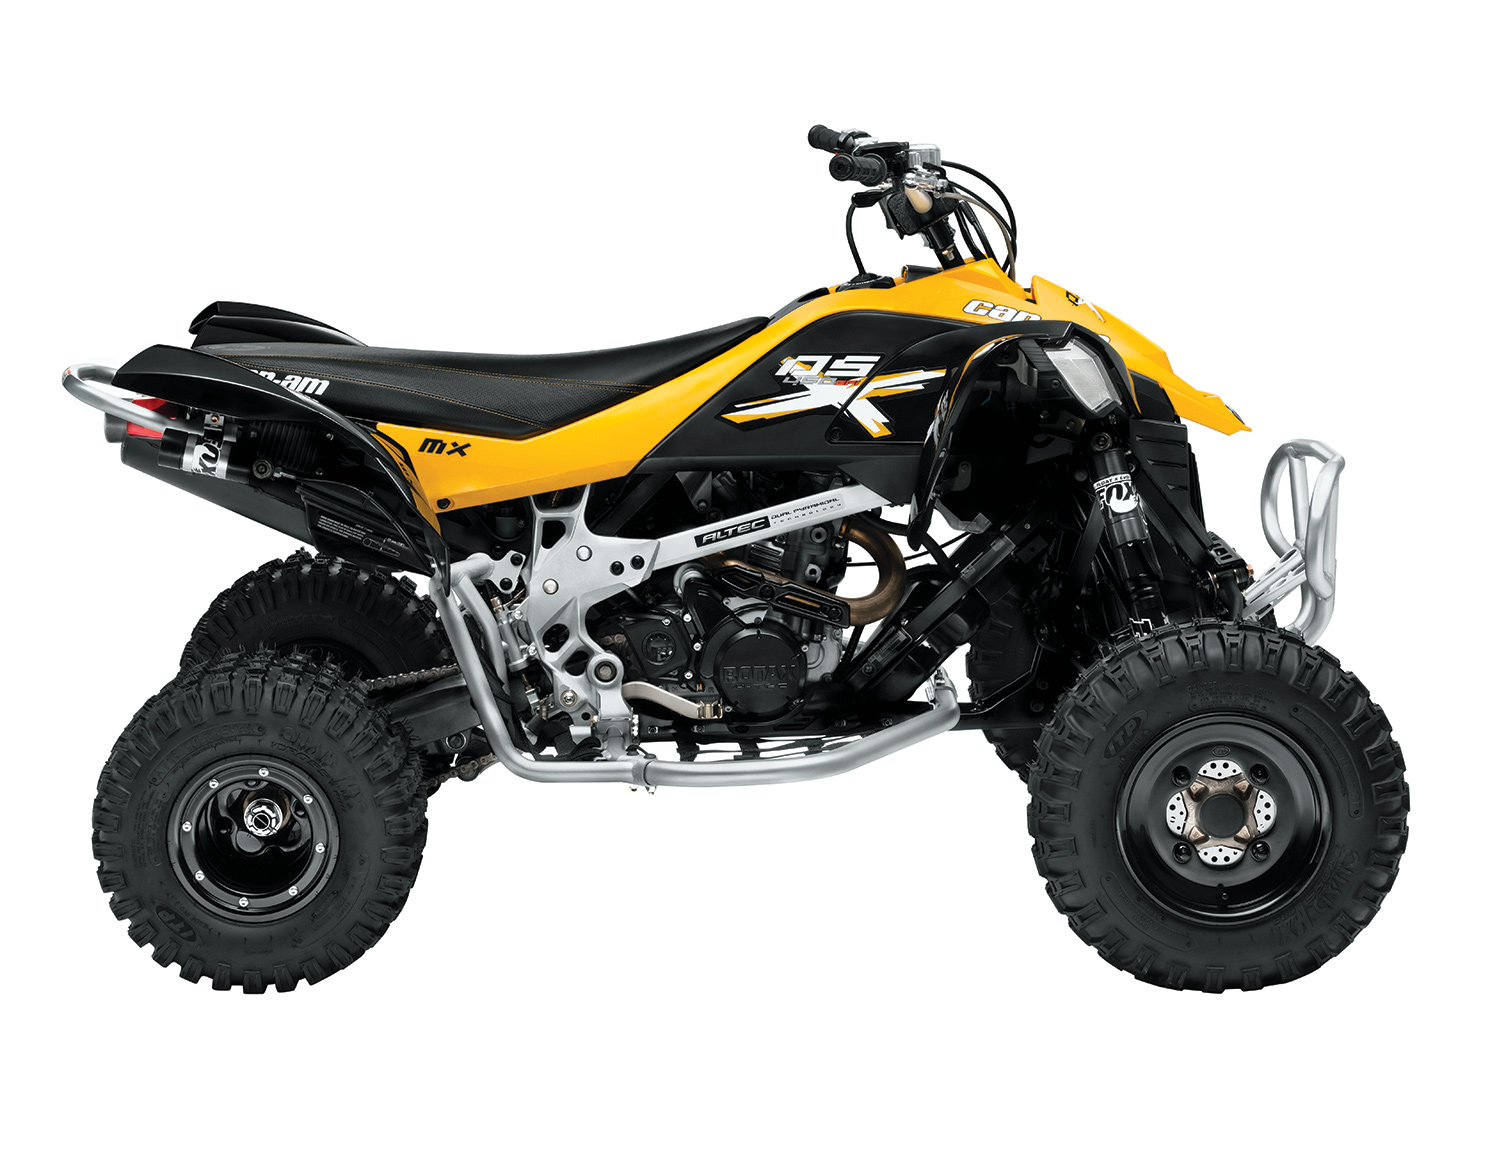  CAN-AM DS 450 XMX v 2014  4 